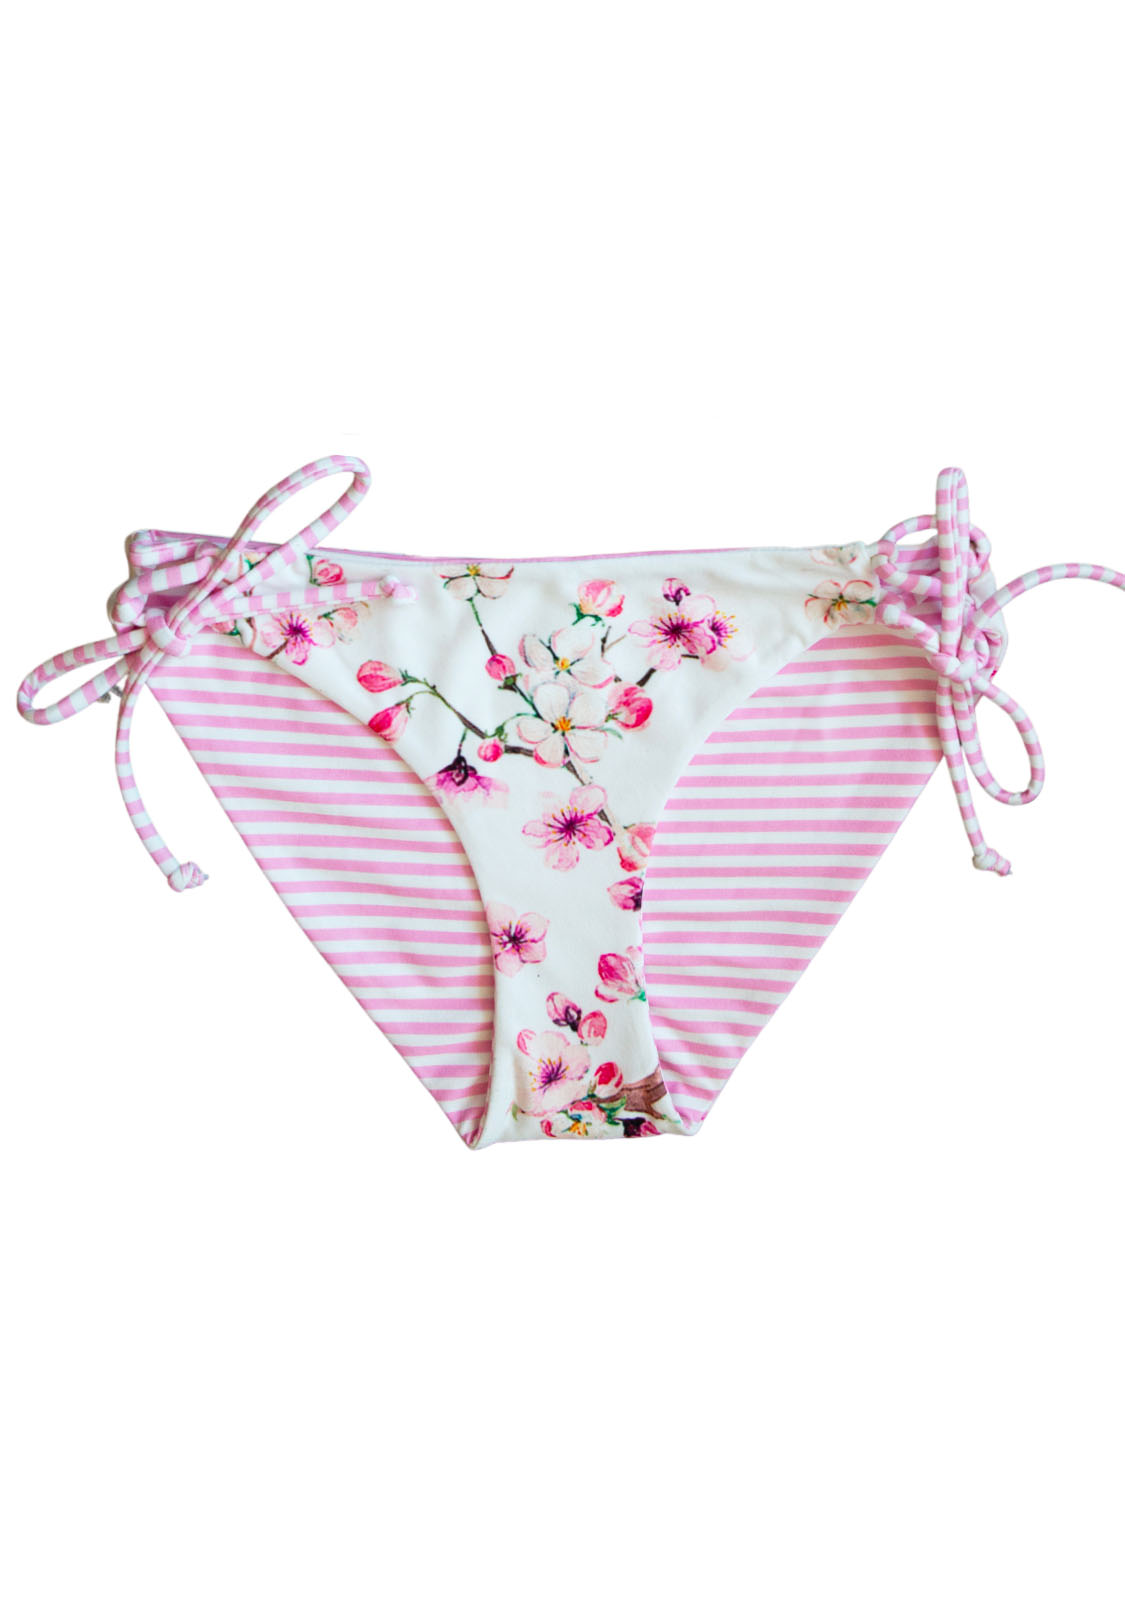 Bikini bottoms with Pink and white florals and a reversible stripe, with a Full Coverage classic cut, adjustable side ties.